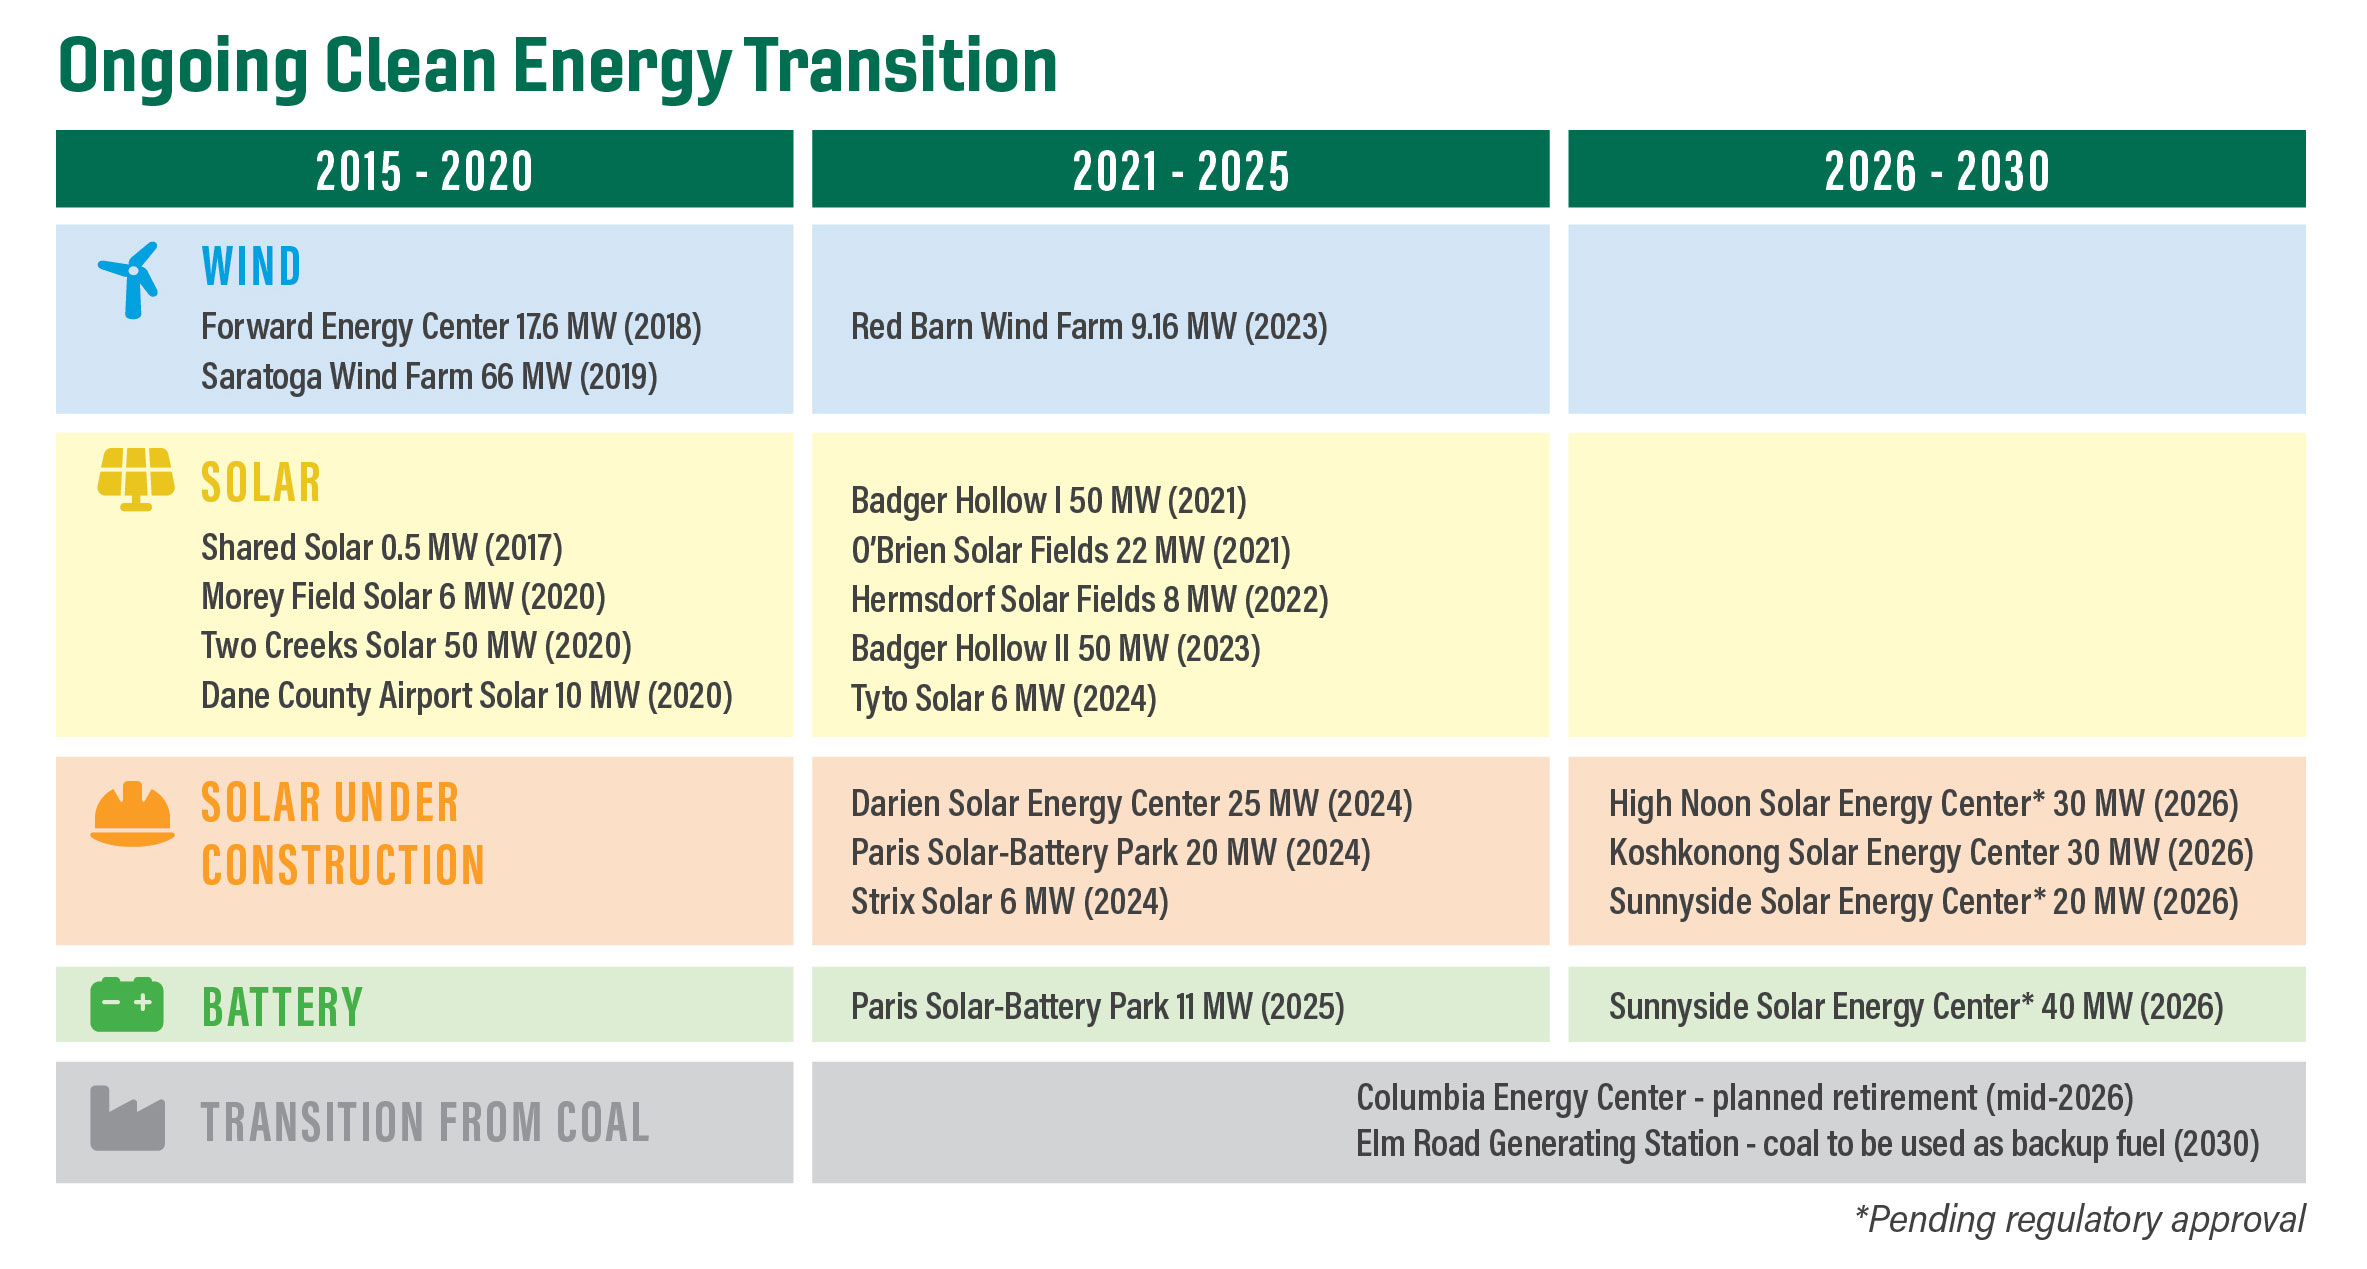 Table showing MGE's ongoing clean energy transition